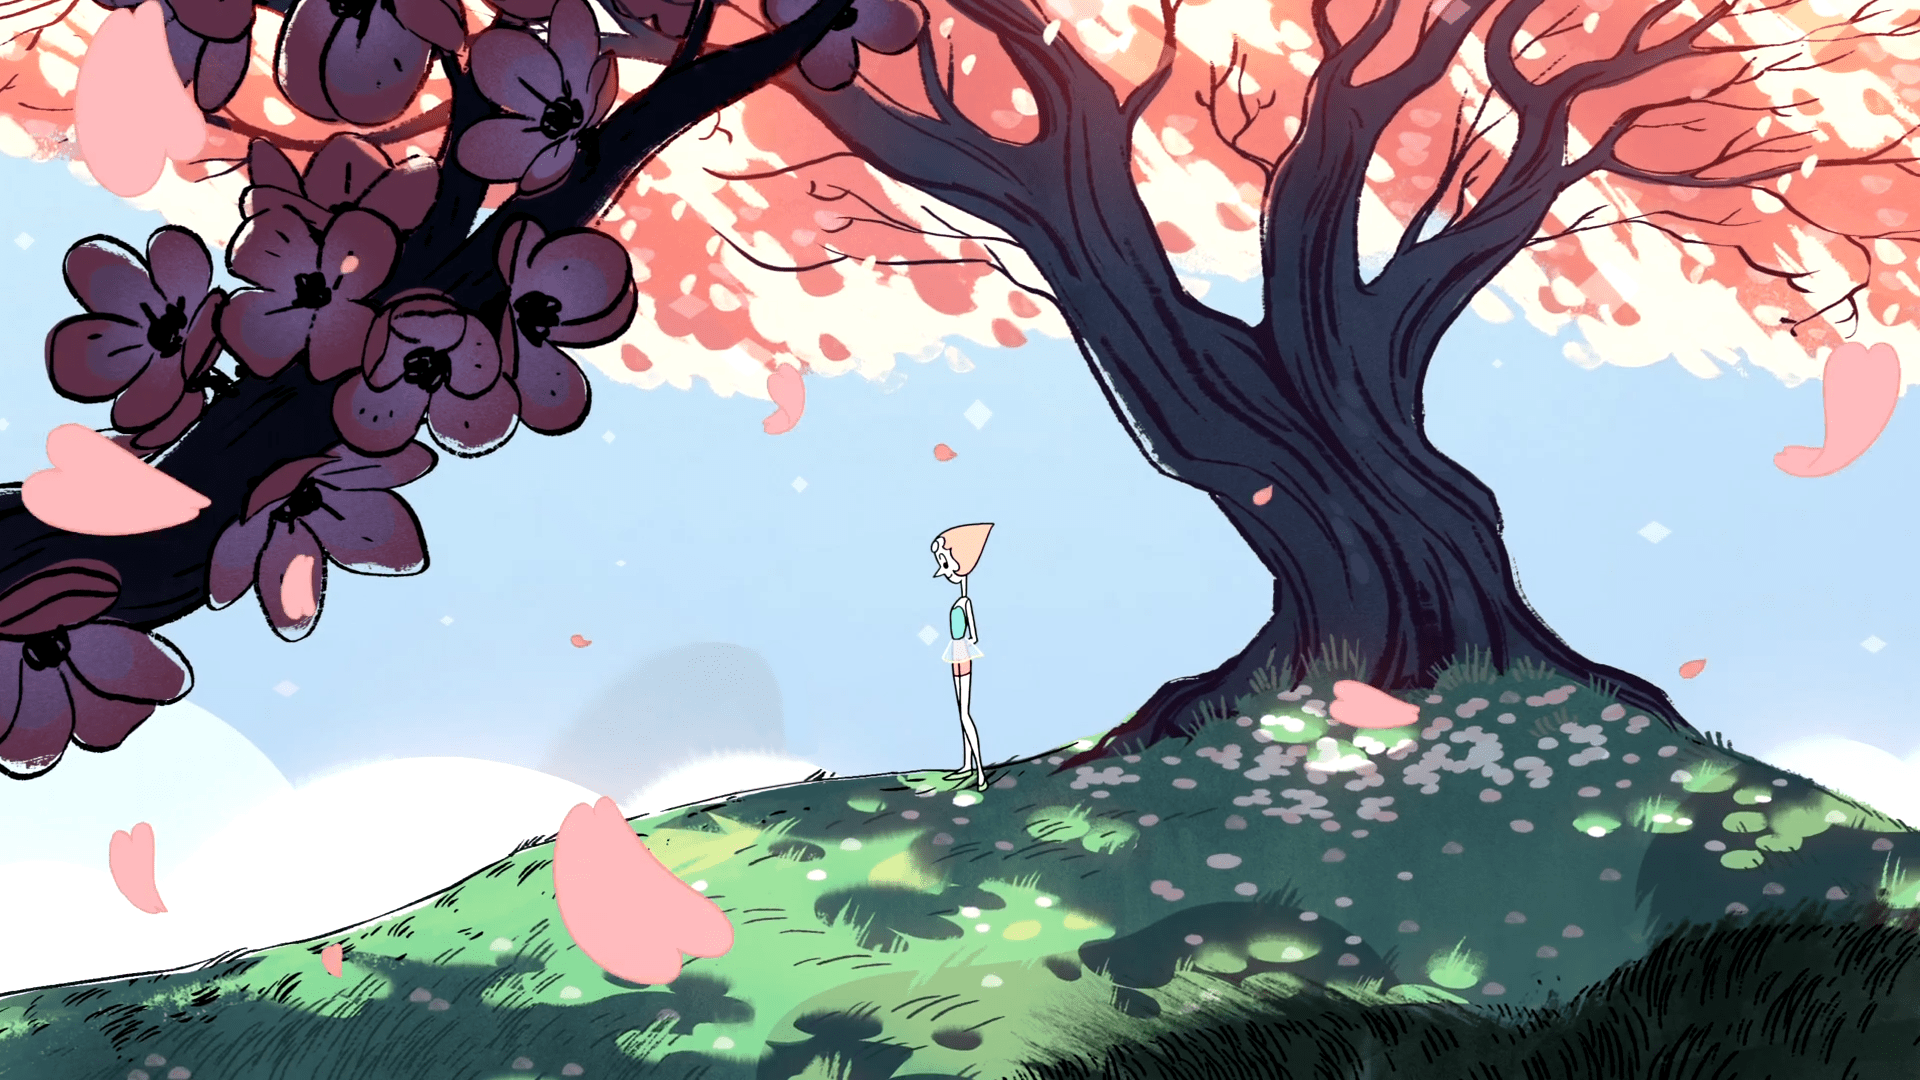 A person standing underneath an apple tree - Steven Universe